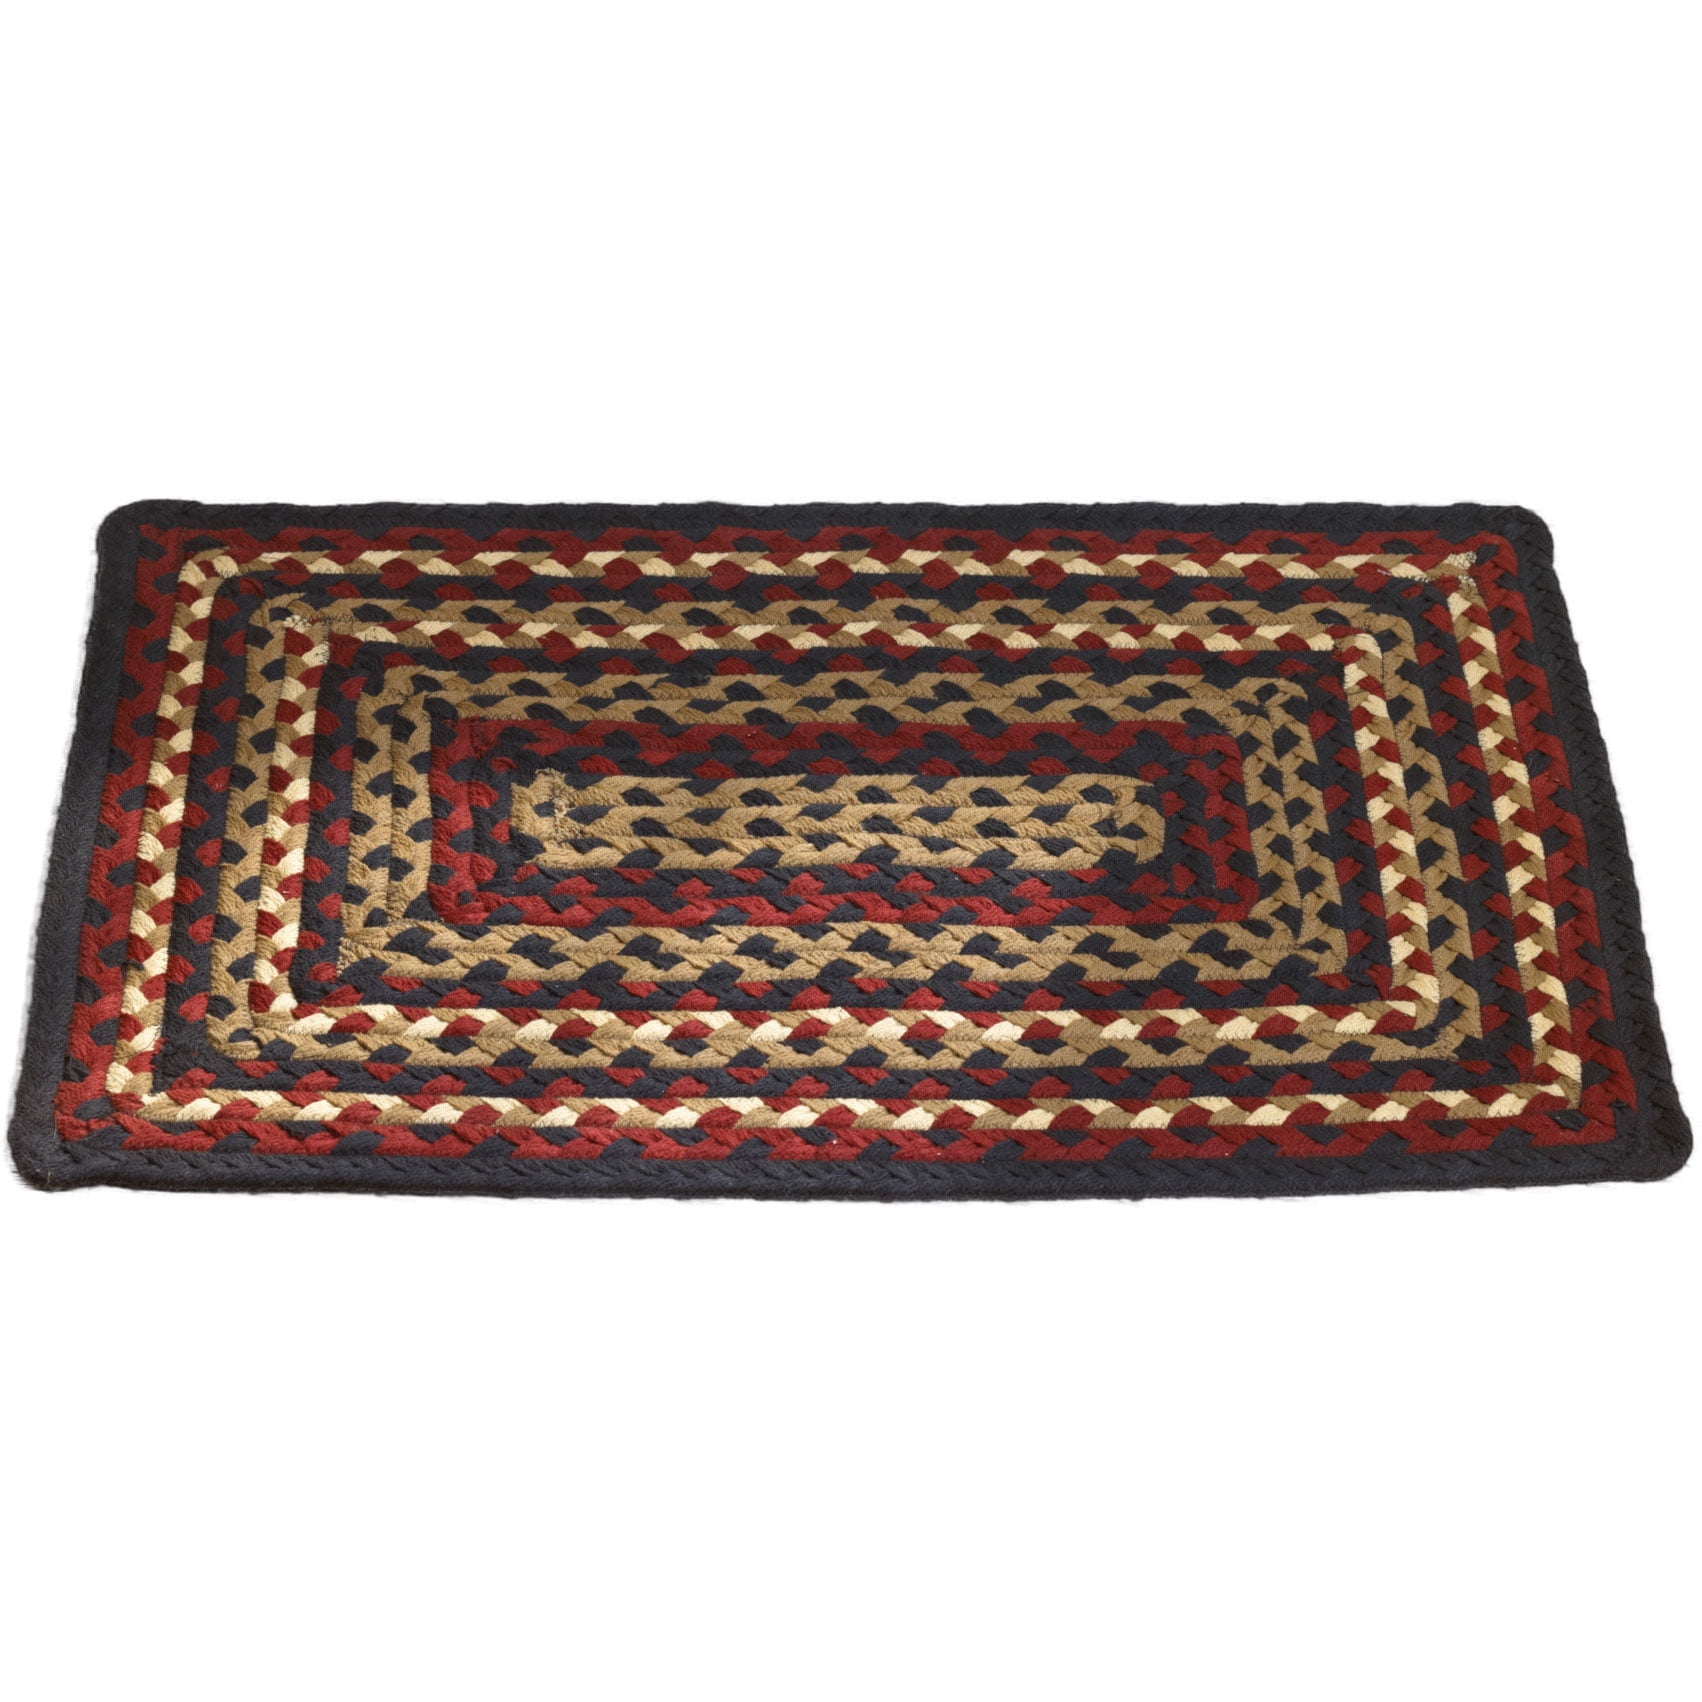 Primitive Country Star Braided Area Rugs Black/Red/Cream Colors Oval Rectangle 